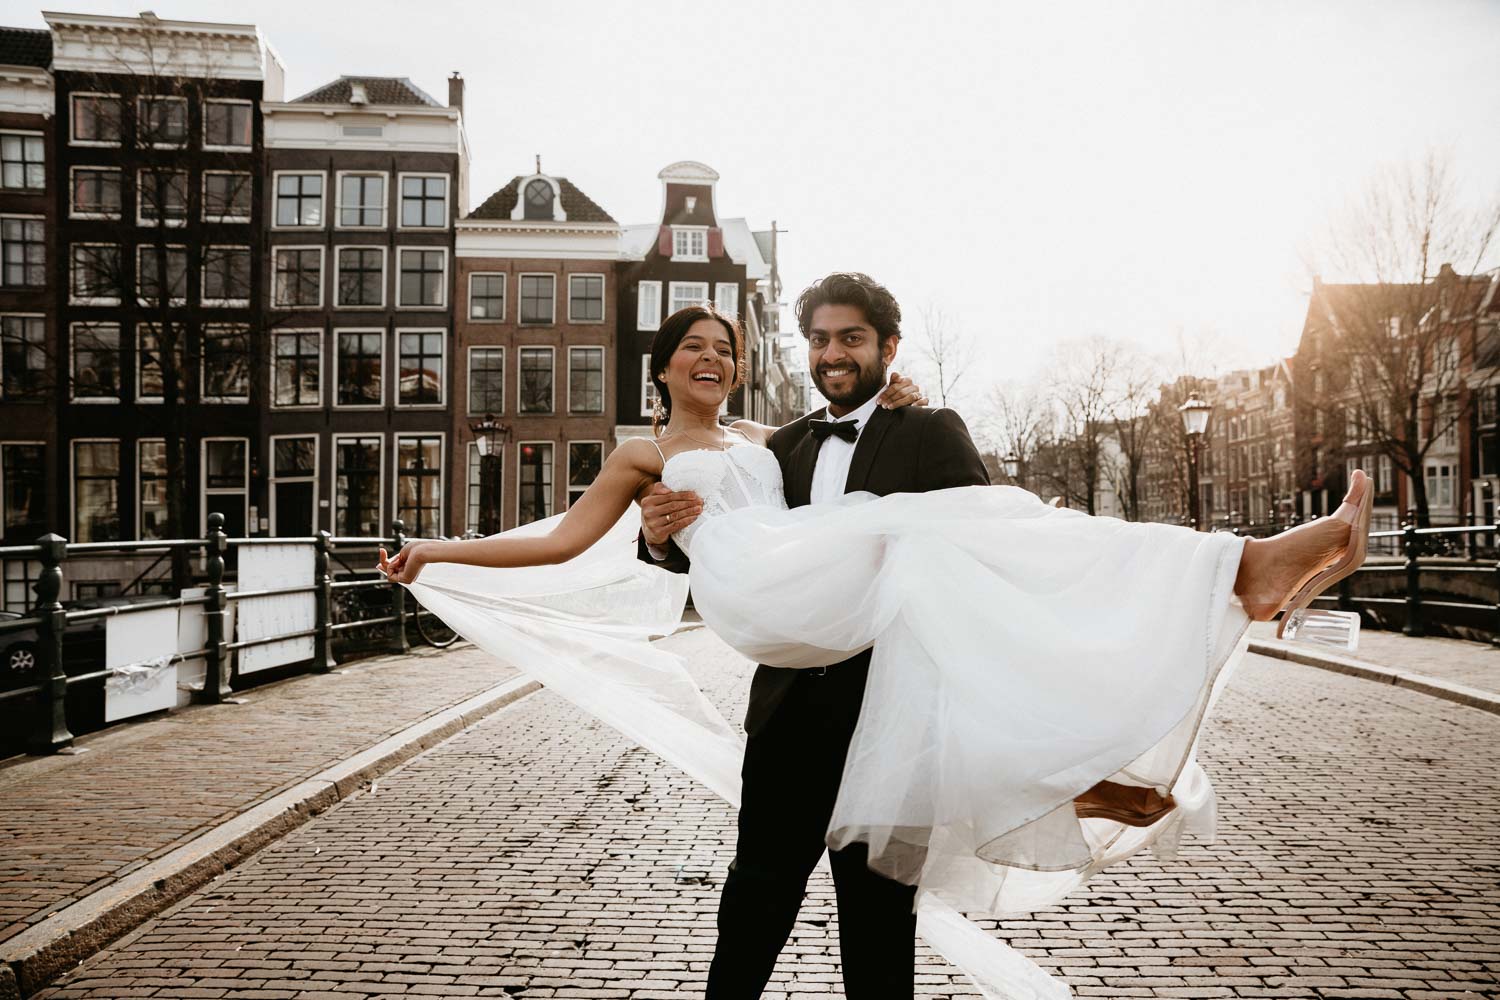 the couple stands on the pavement at the Indian wedding in Amsterdam. The groom in a black suit holds the bride in his arms. The bride is holding a bouquet of white roses.